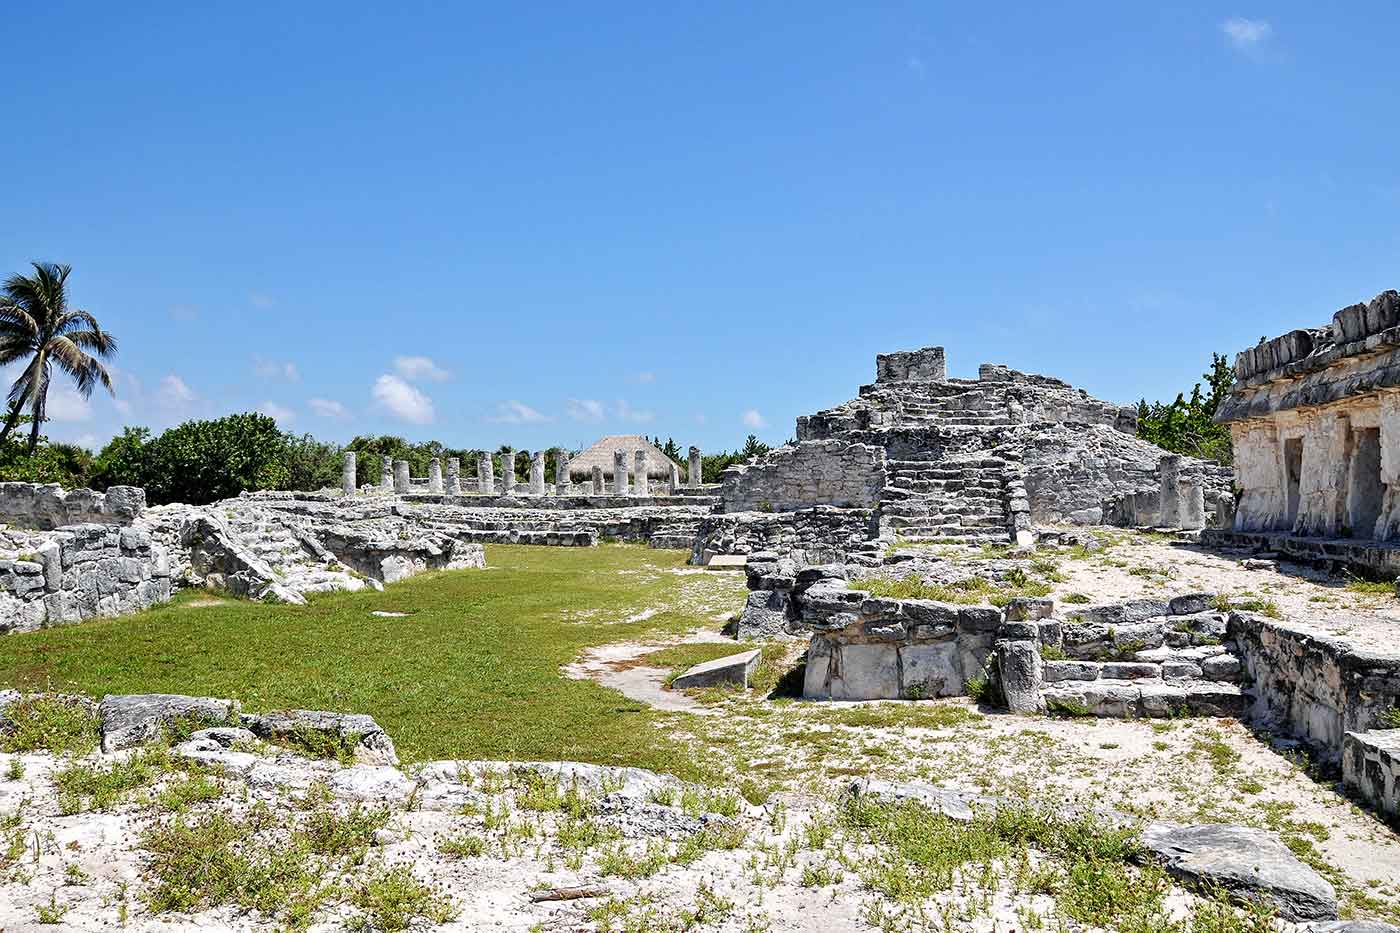 21 Amazing Tourist Attractions to See and Things to Do in Cancún, Mexico